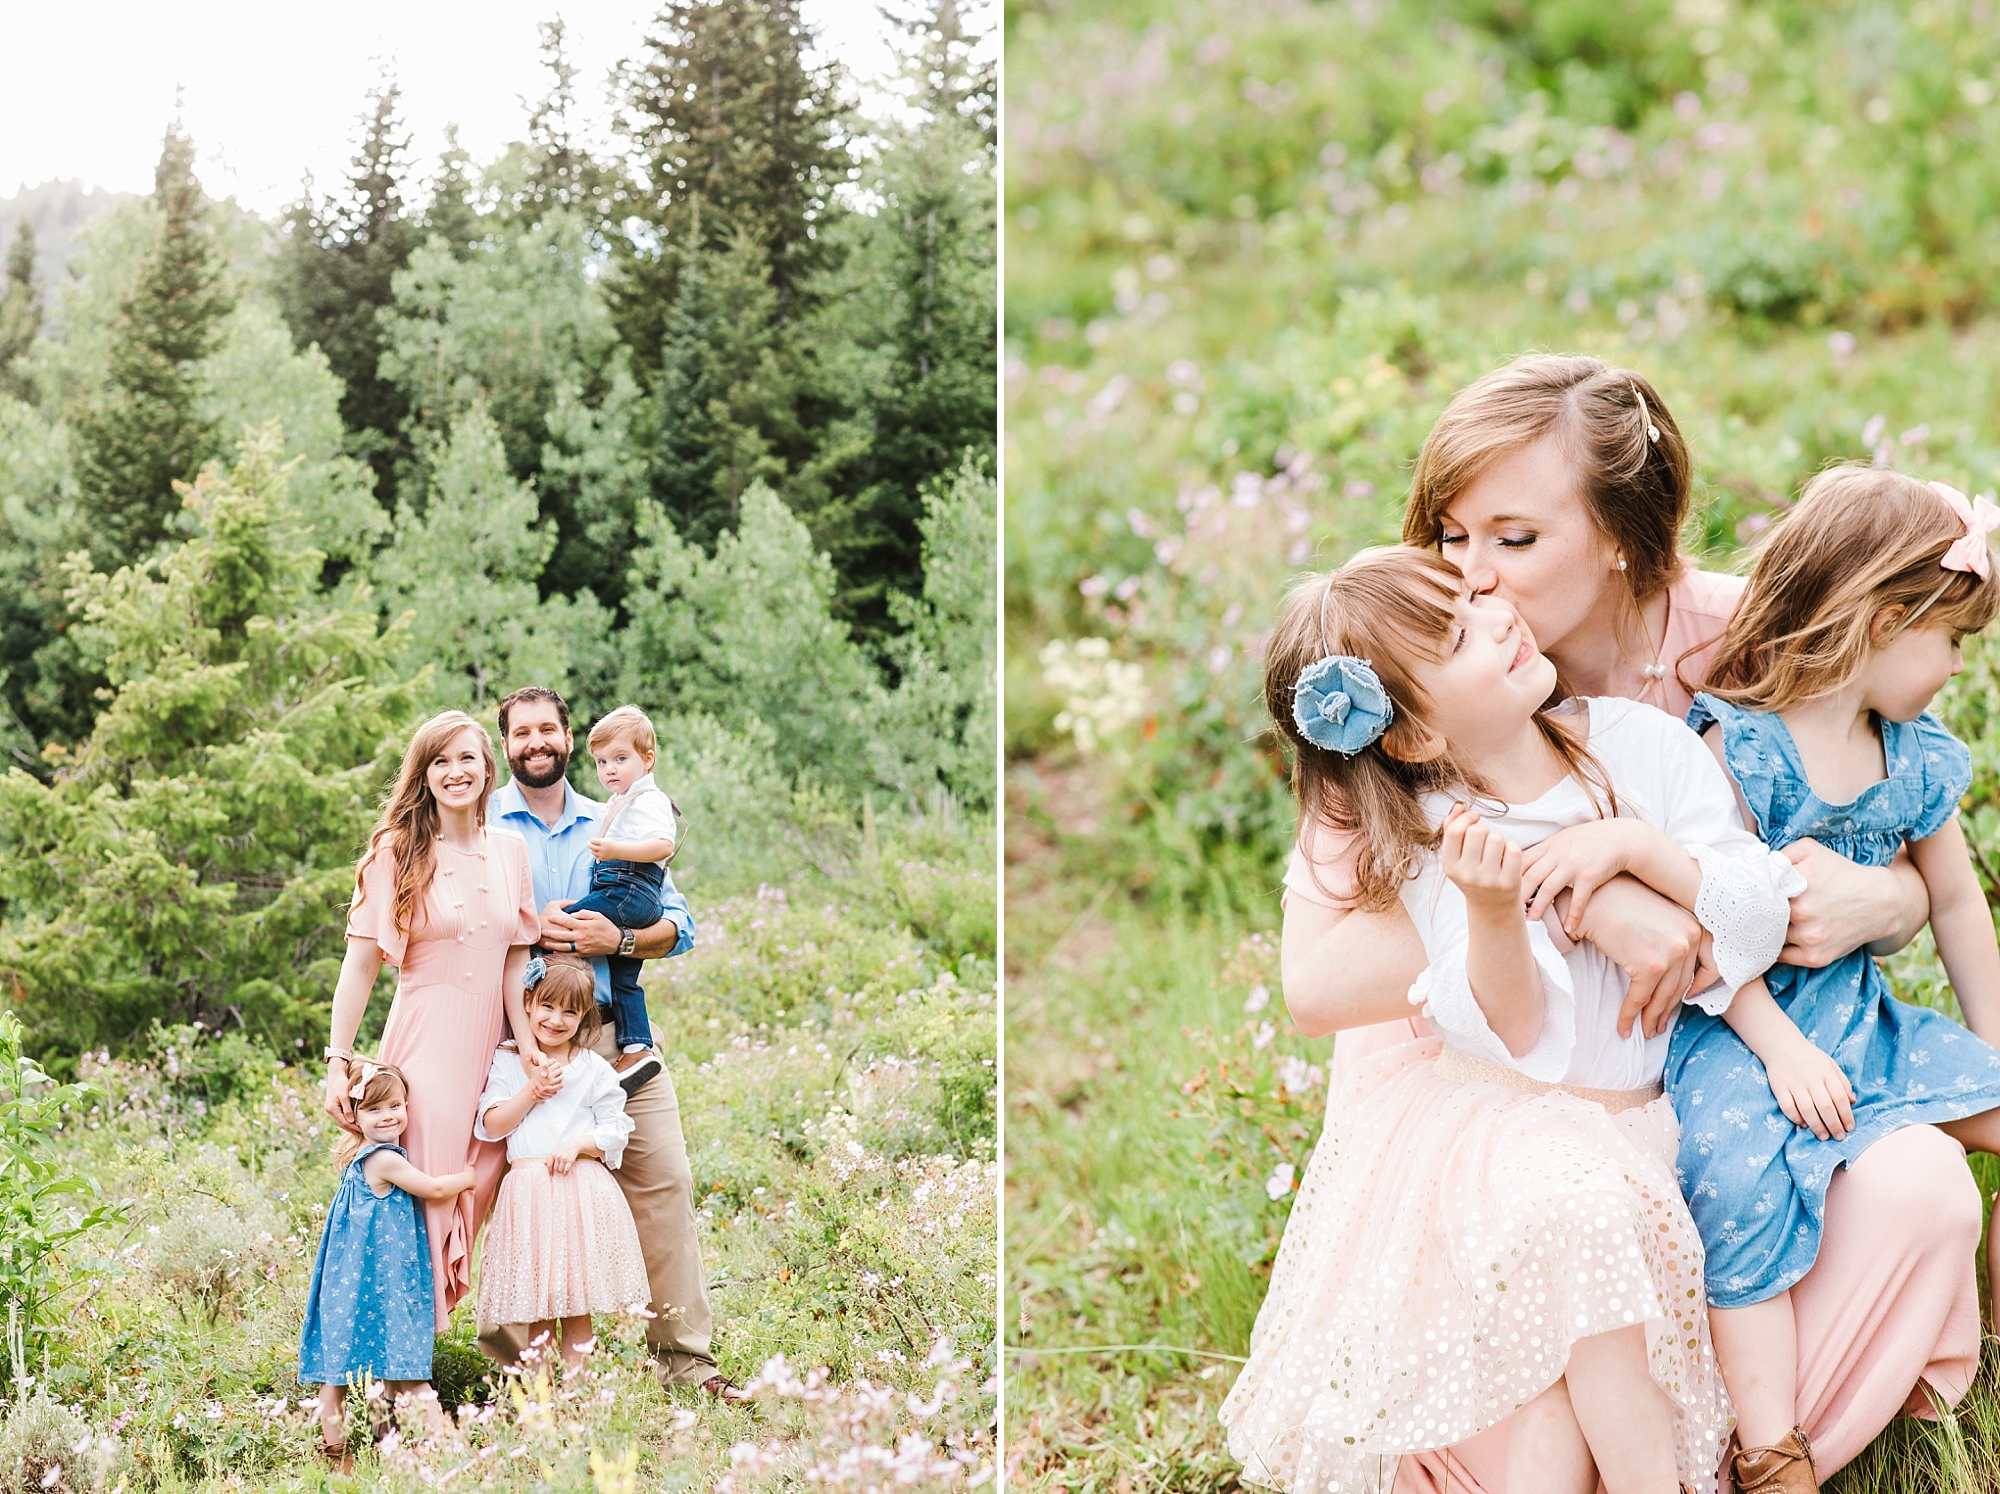 Soft pink, white, and tan with a pop of blue make a perfect color palette for your upcoming summer family session.